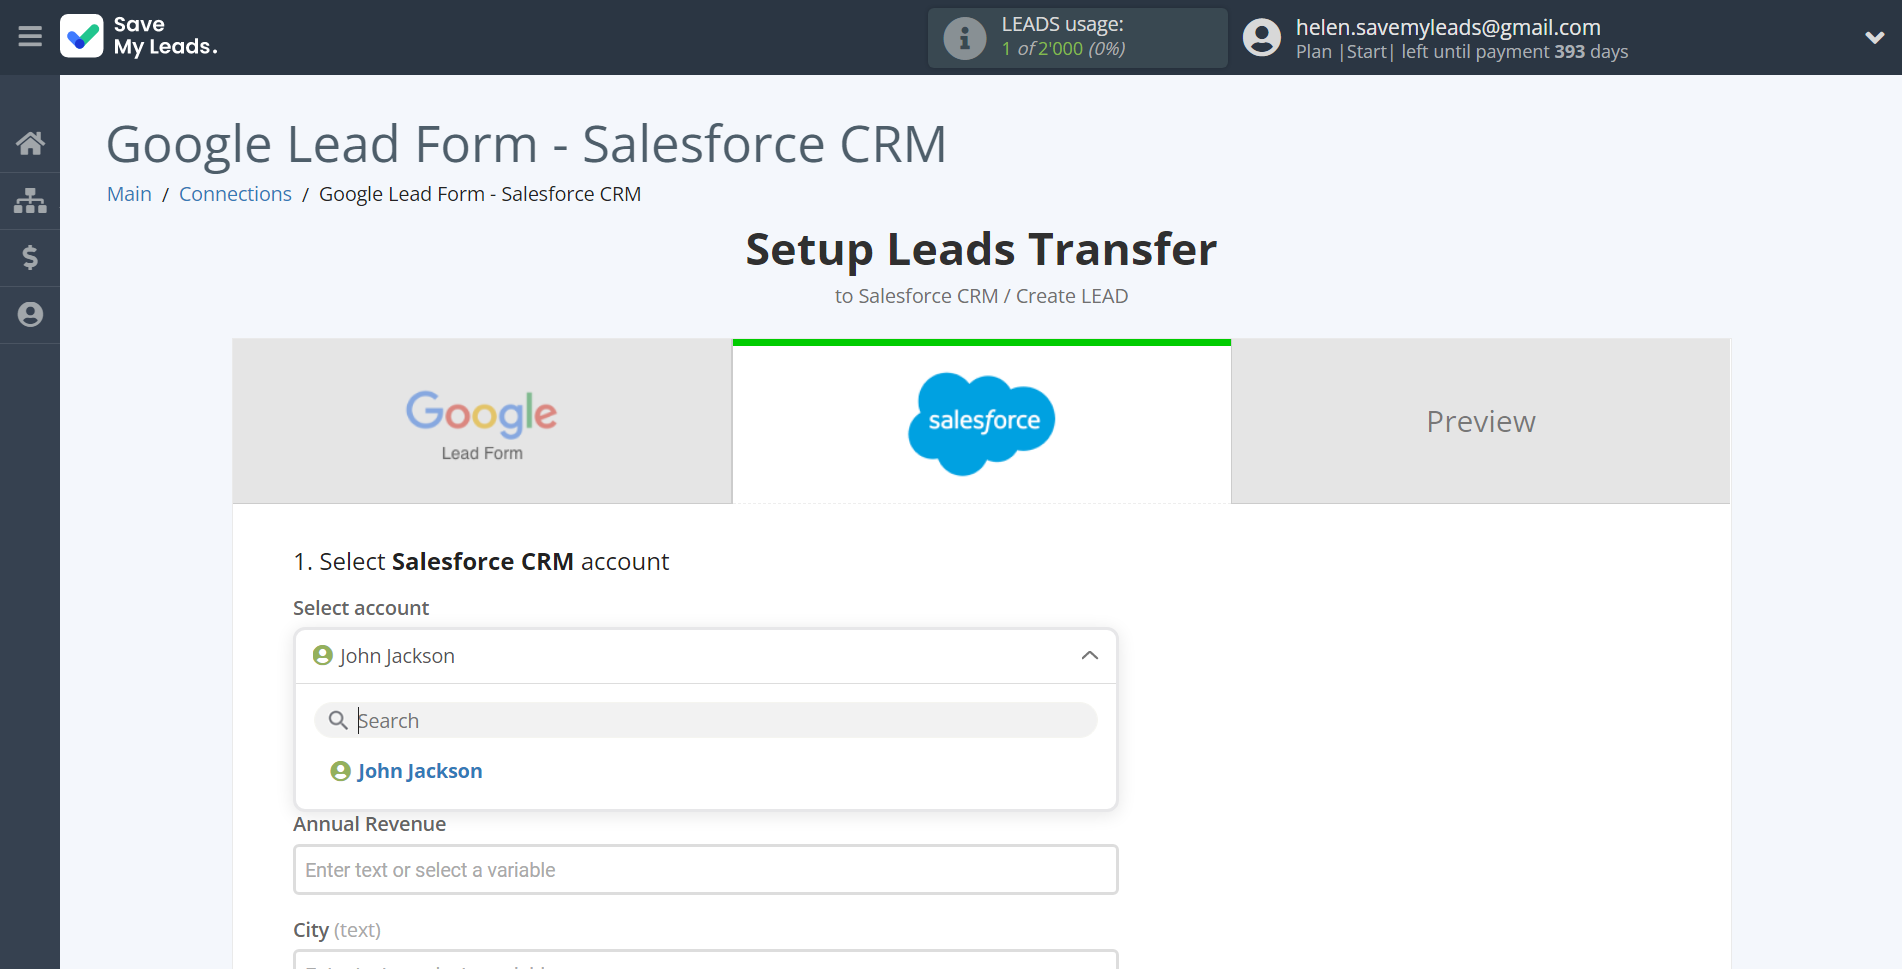 How to Connect Google Lead Form with Salesforce CRM Create Lead | Data Destination account selection